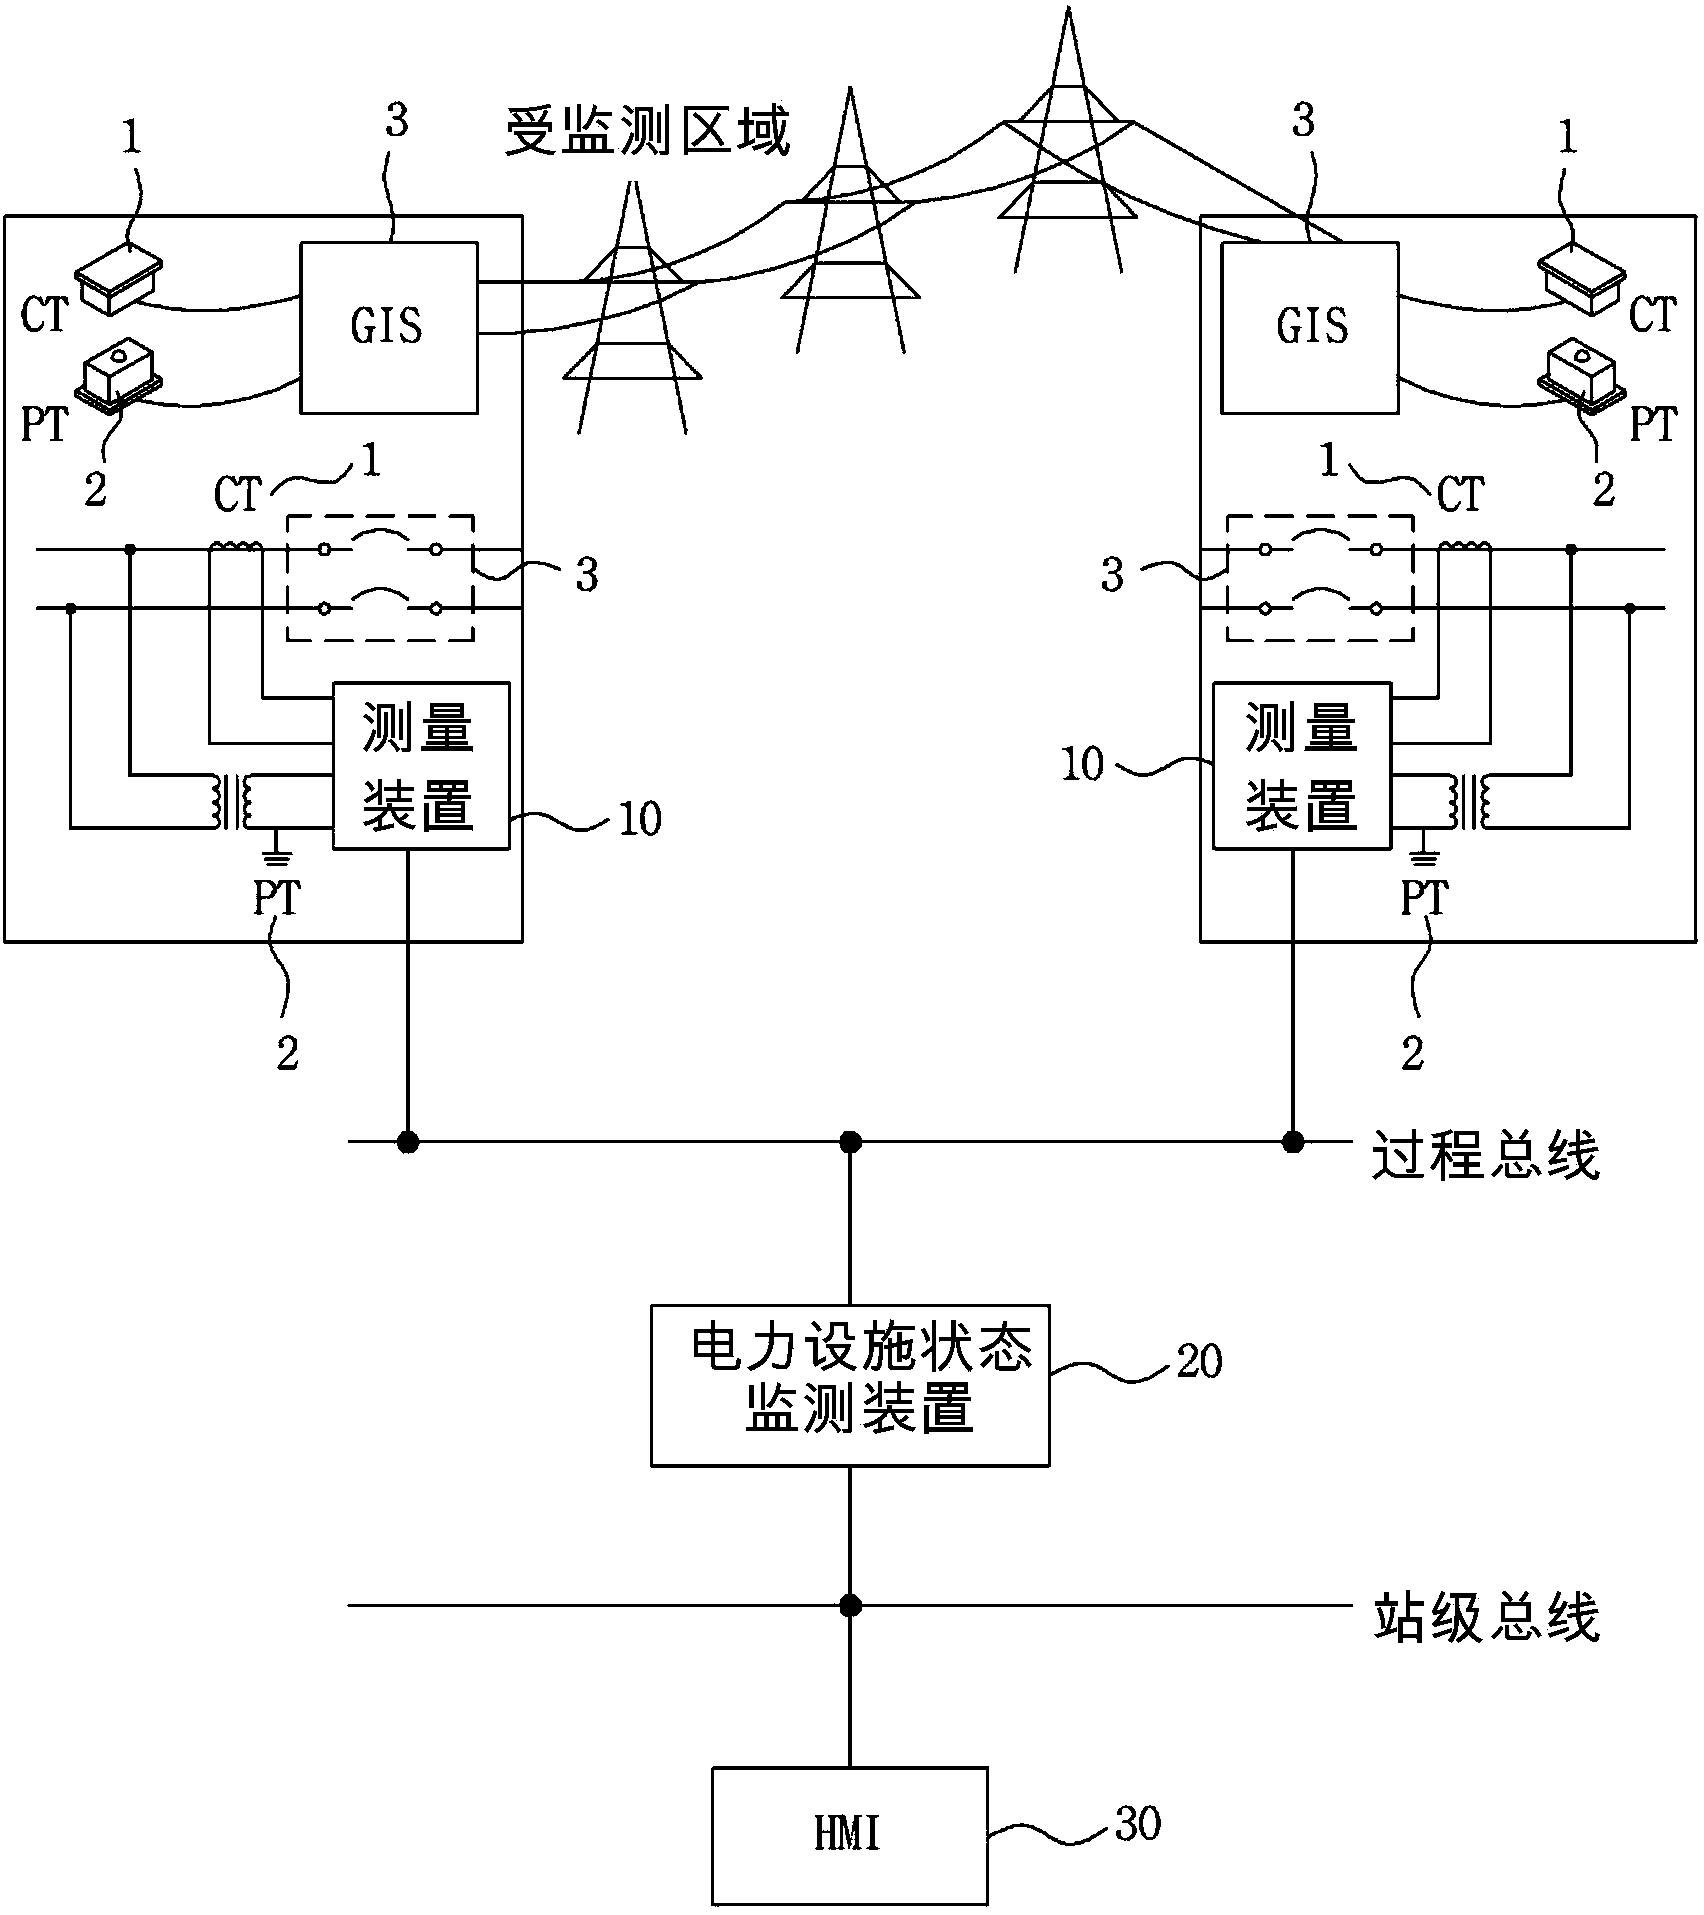 System and method for monitoring power facility status by measuring online electric circuit parameter